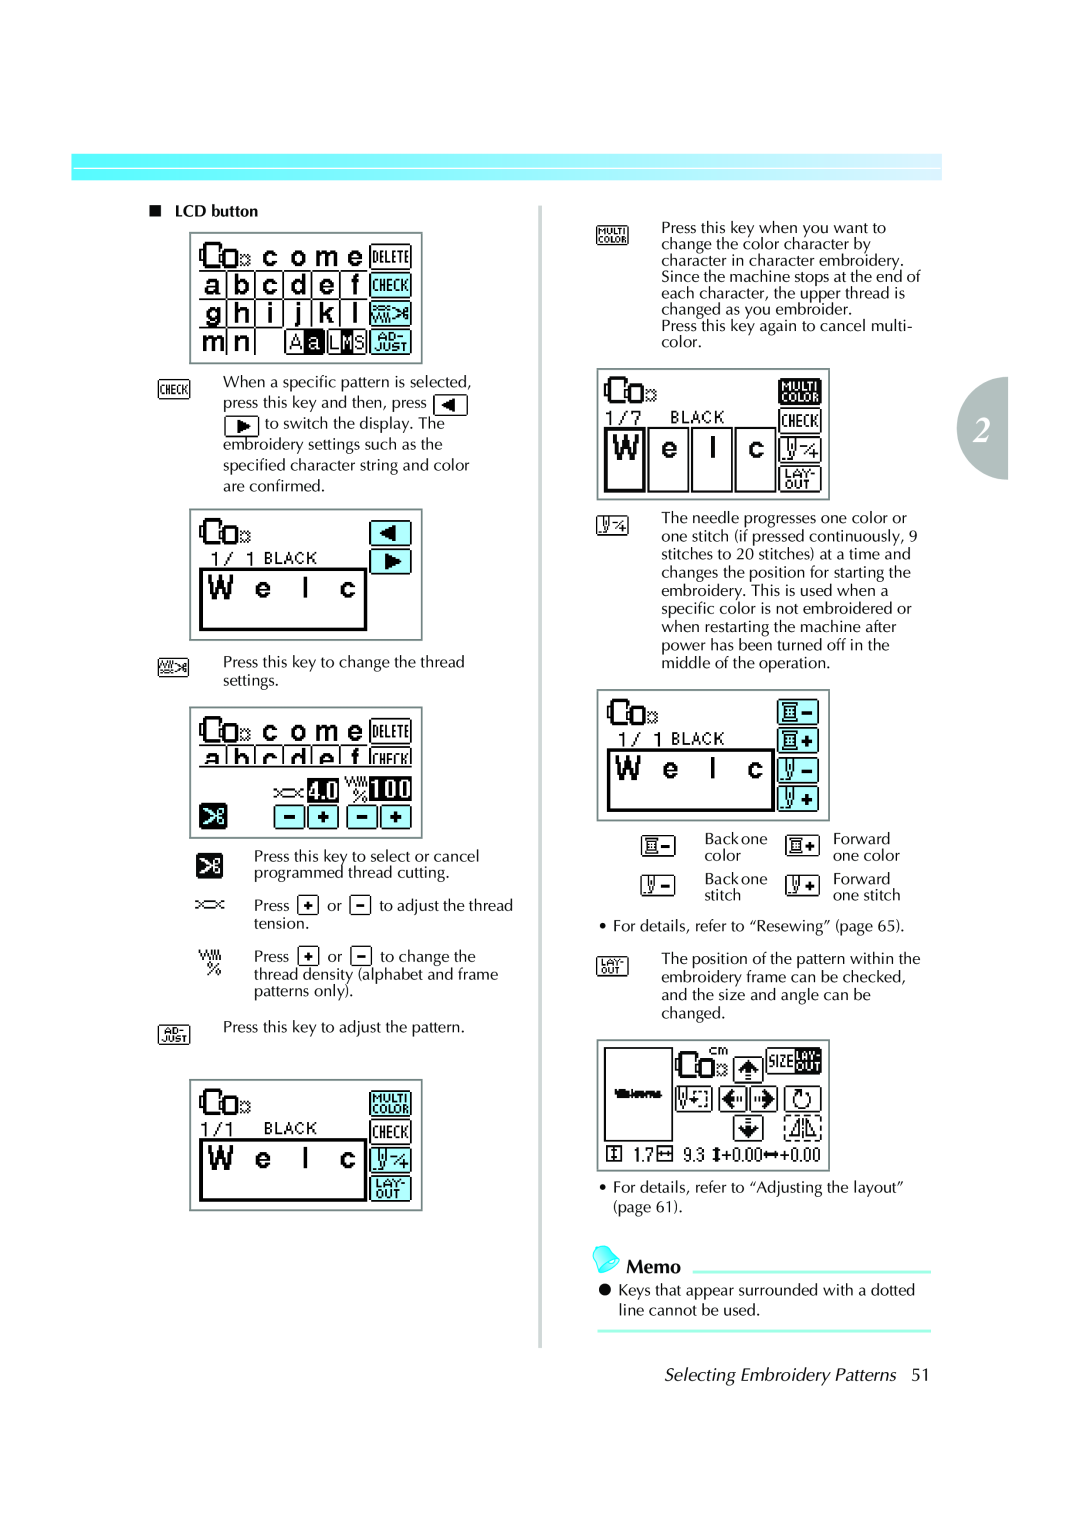 Brother Computerized Embroidery Machine Memo, Selecting Embroidery Patterns, LCD button, one color, one stitch 